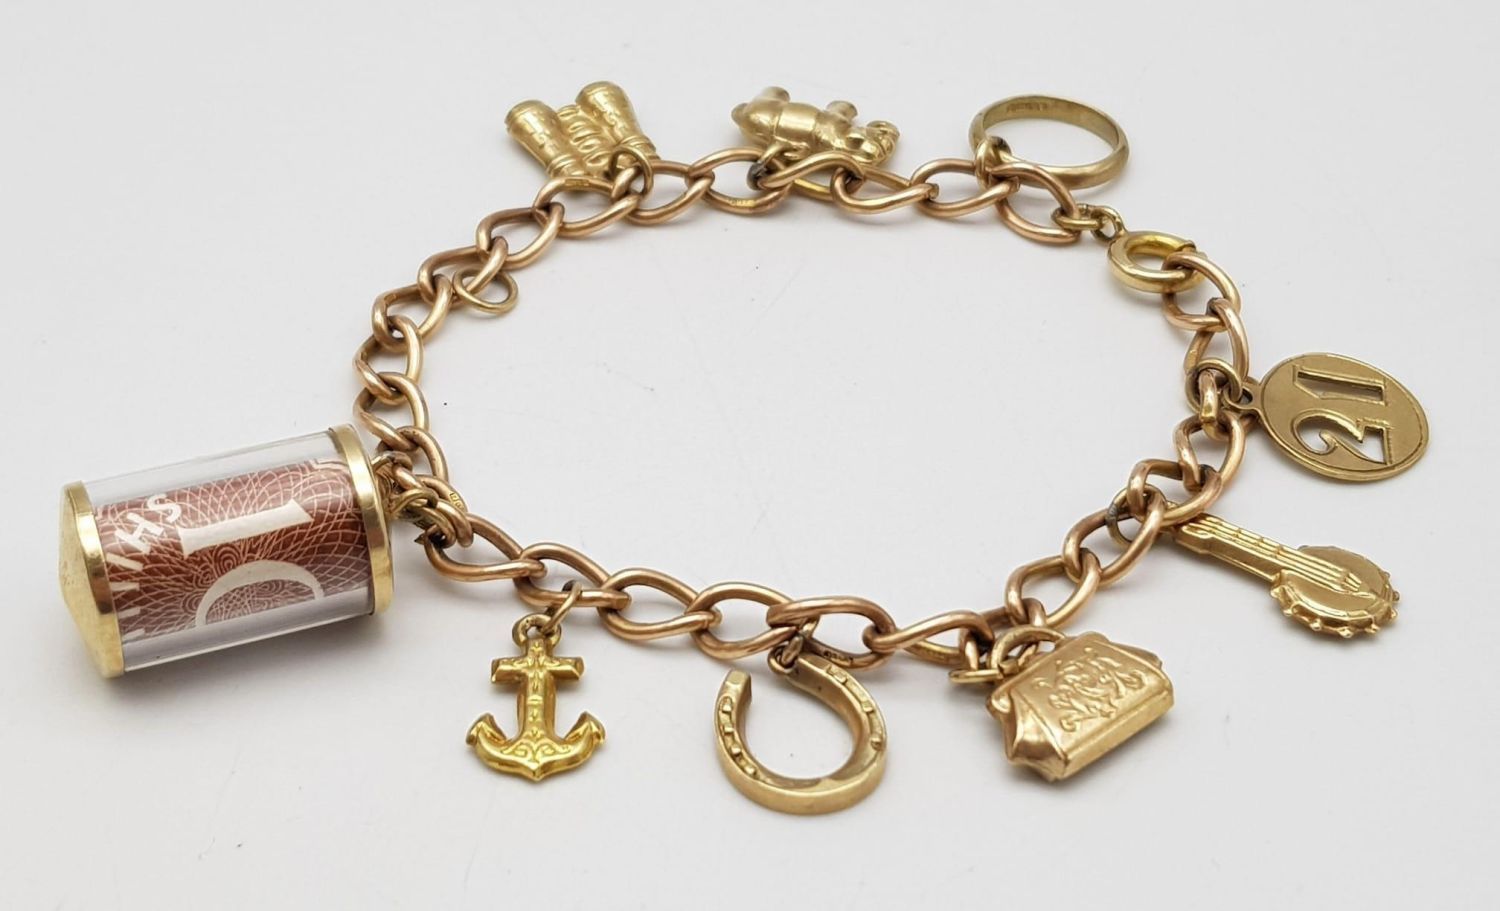 Null A 9K Gold Charm Bracelet. 10 charms including: 10 shilling note, handbag an&hellip;